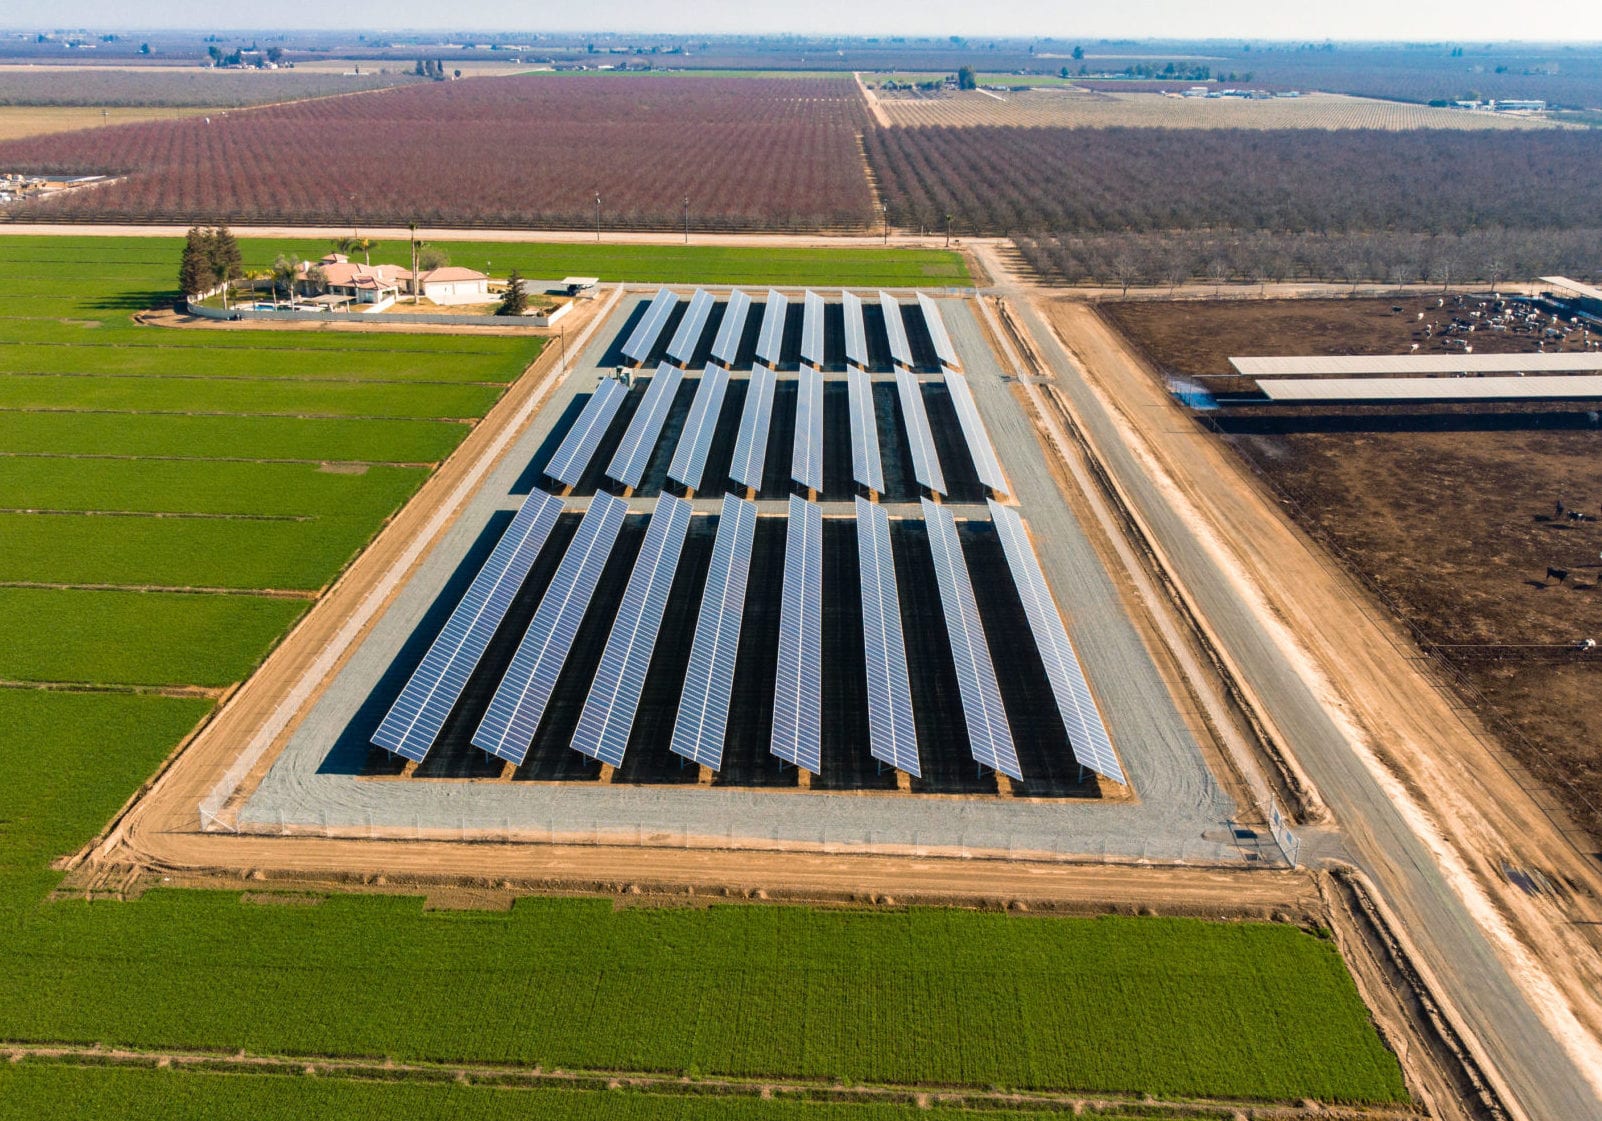 Aerial view of rows of solar panels on a solar farm in California's agriculture industry.